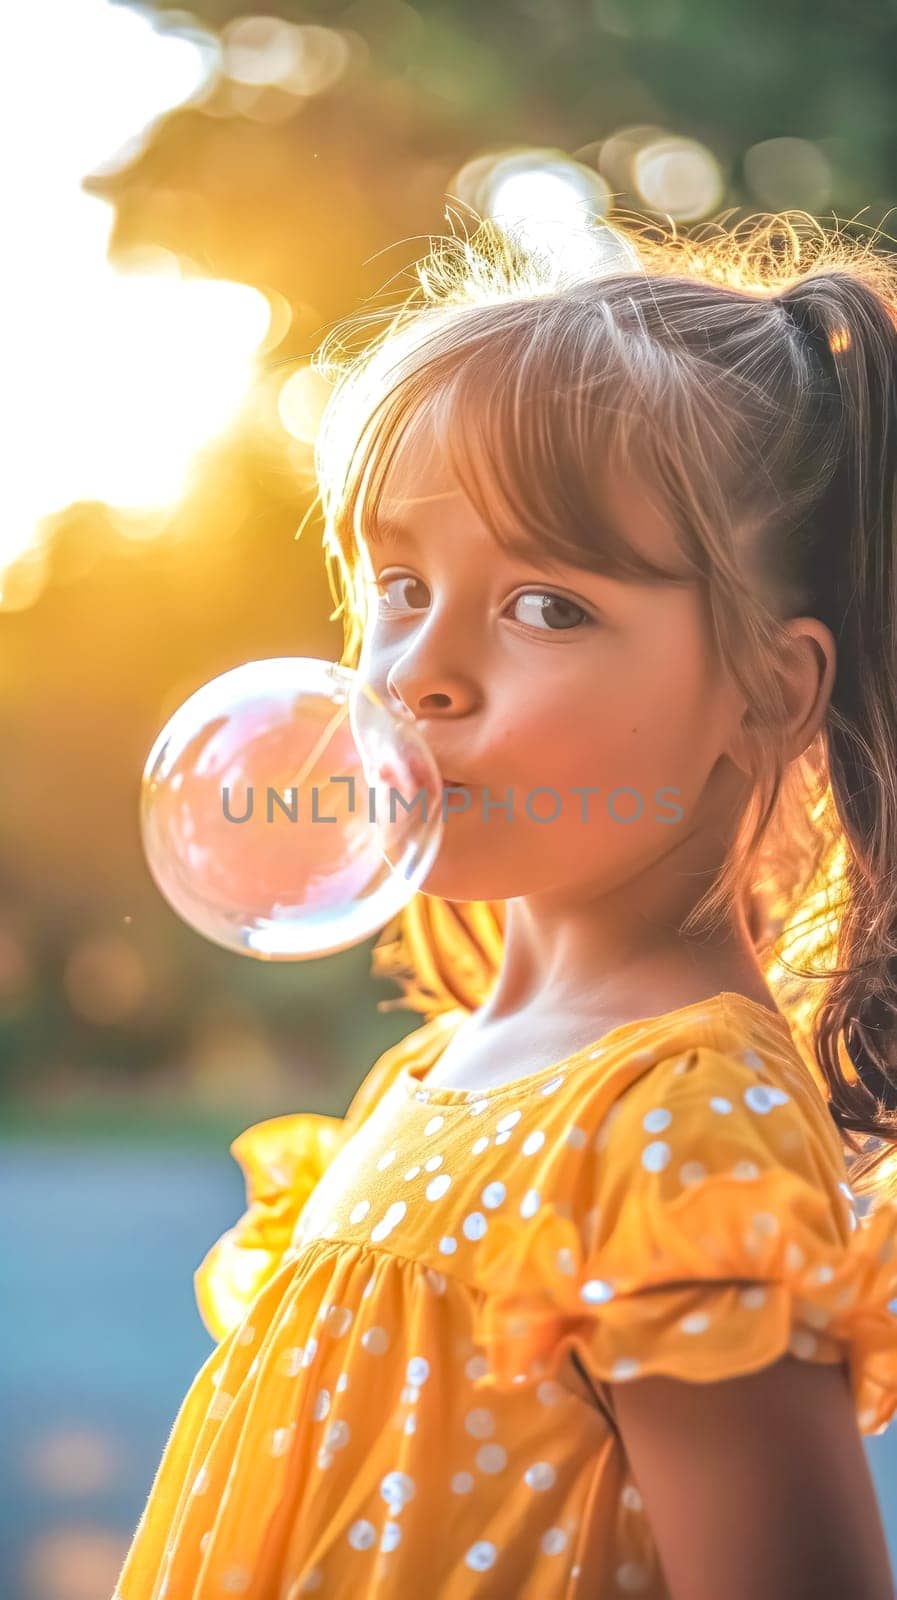 young girl in a yellow dress blowing a bubble gum bubble, with a soft-focus sunlit background, capturing a moment of playful innocence, vertical